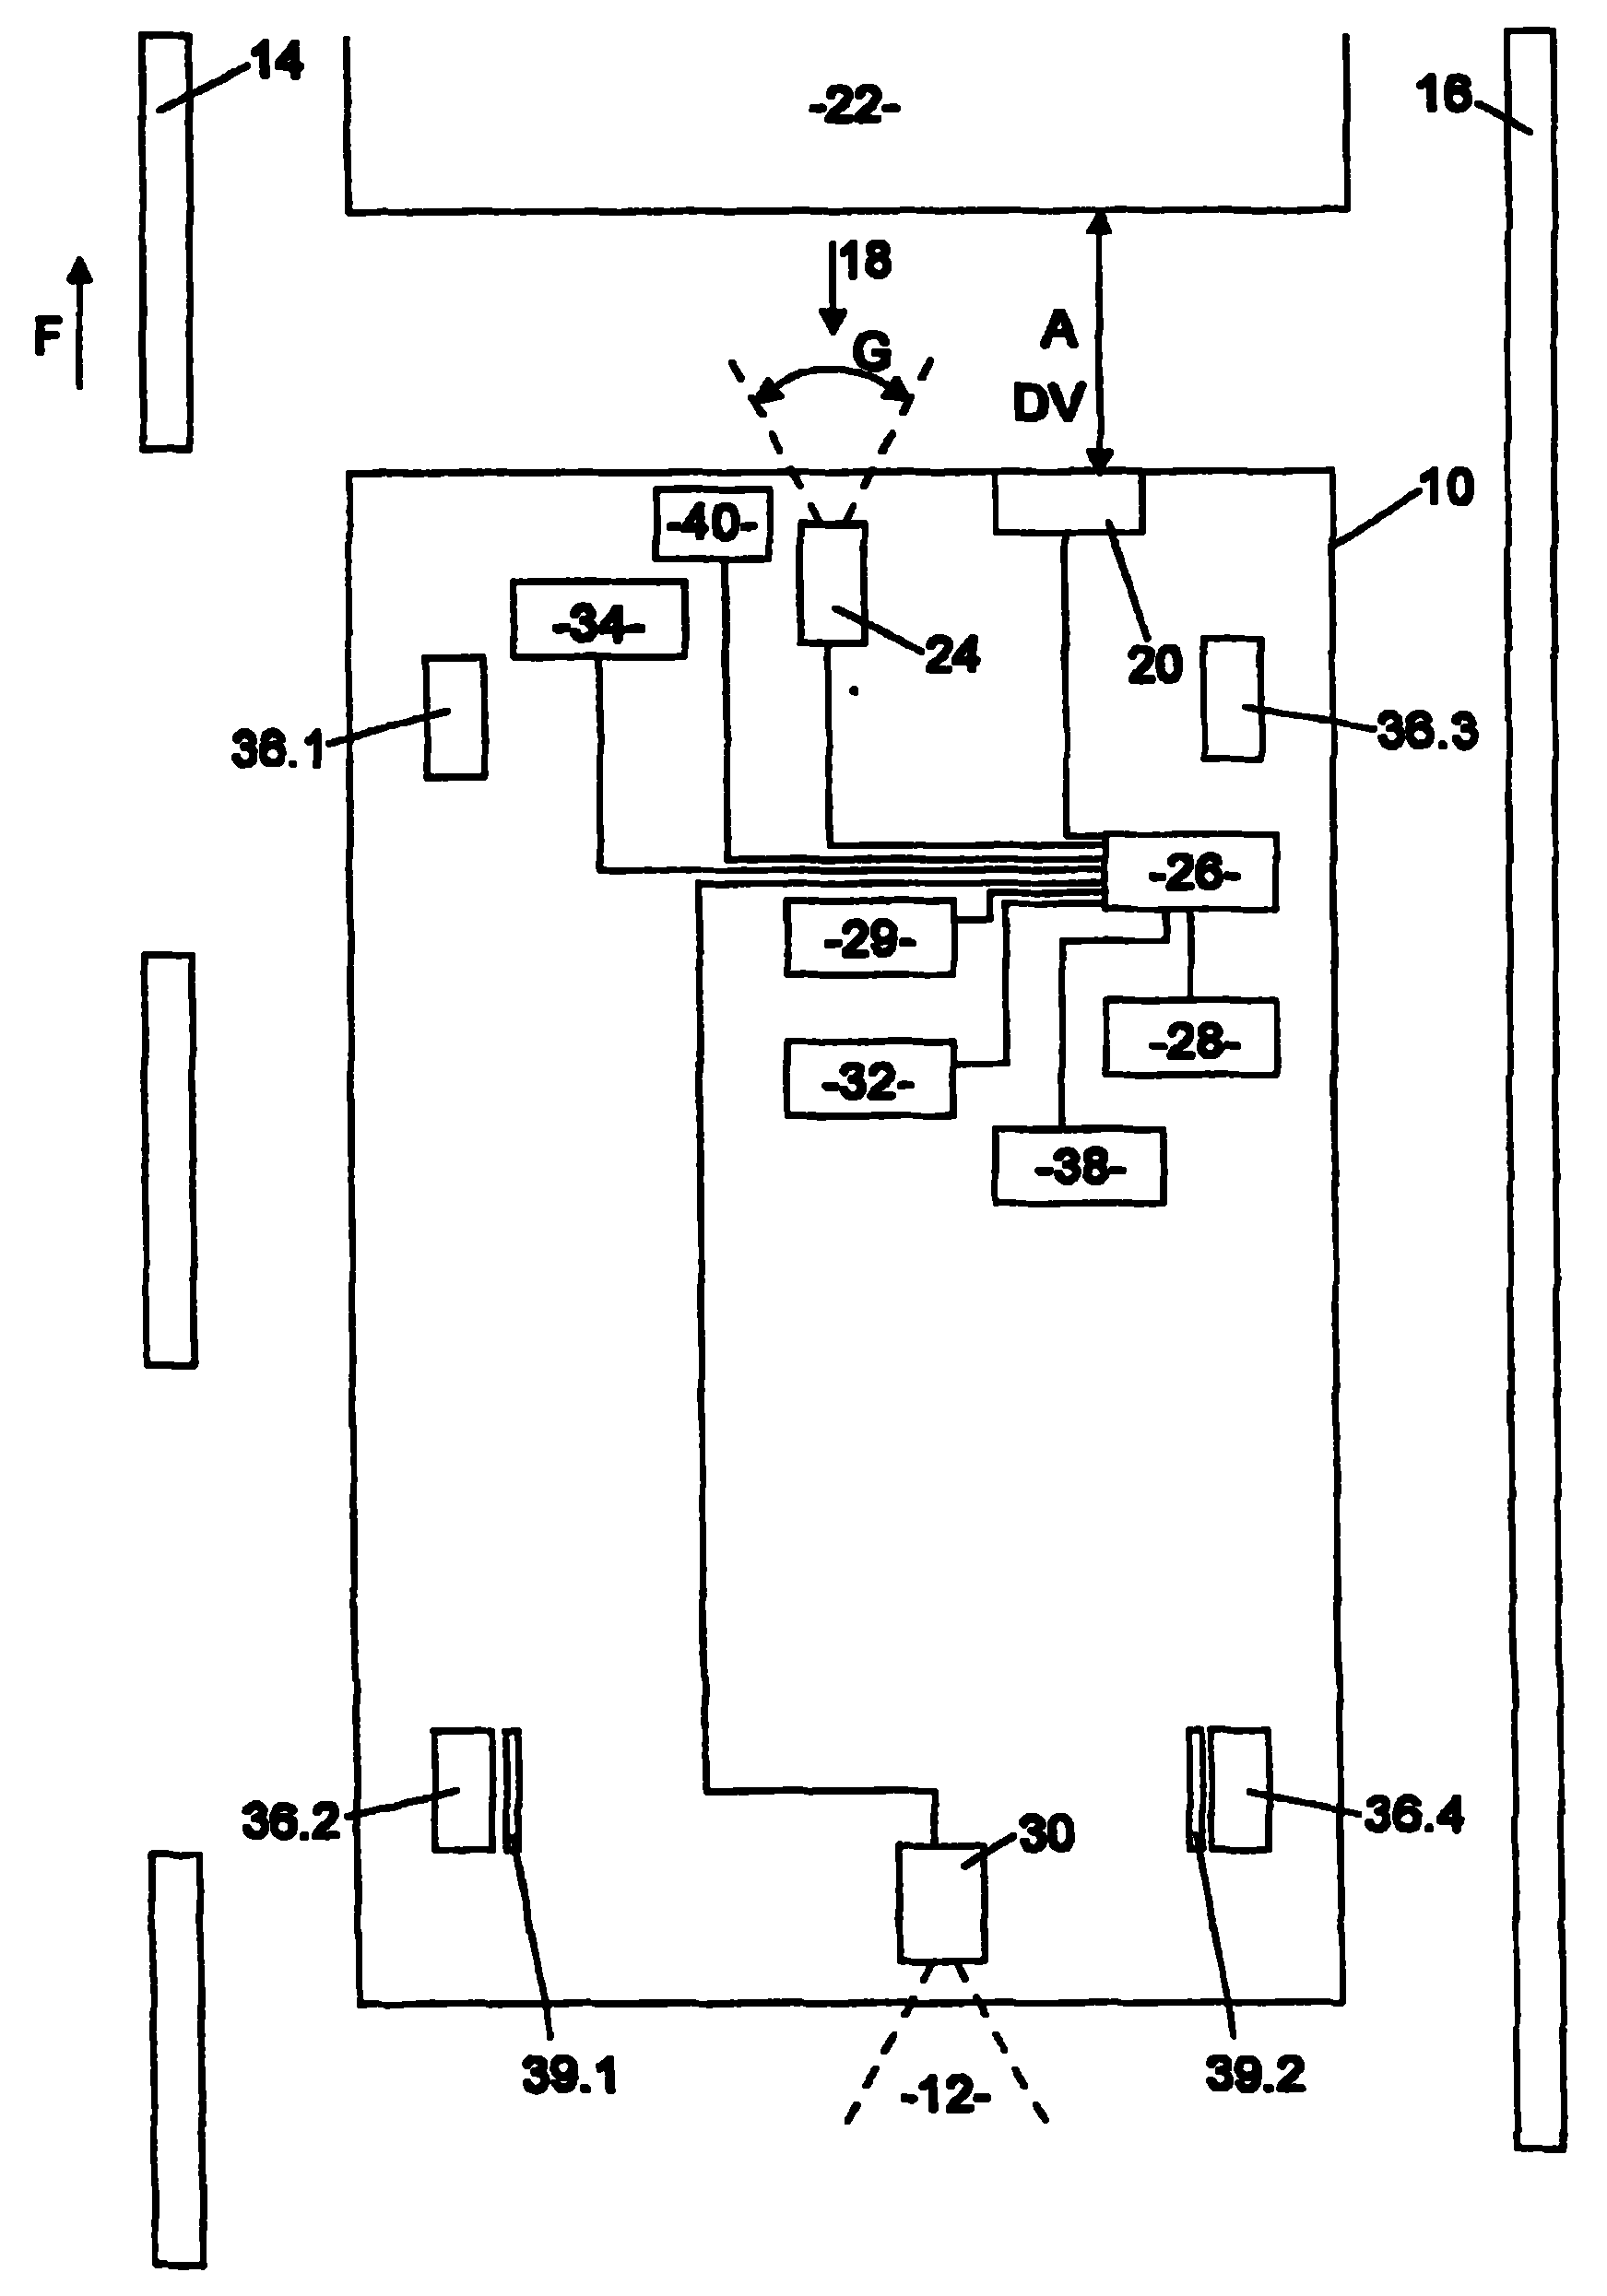 Driver assistance system for a motor vehicle